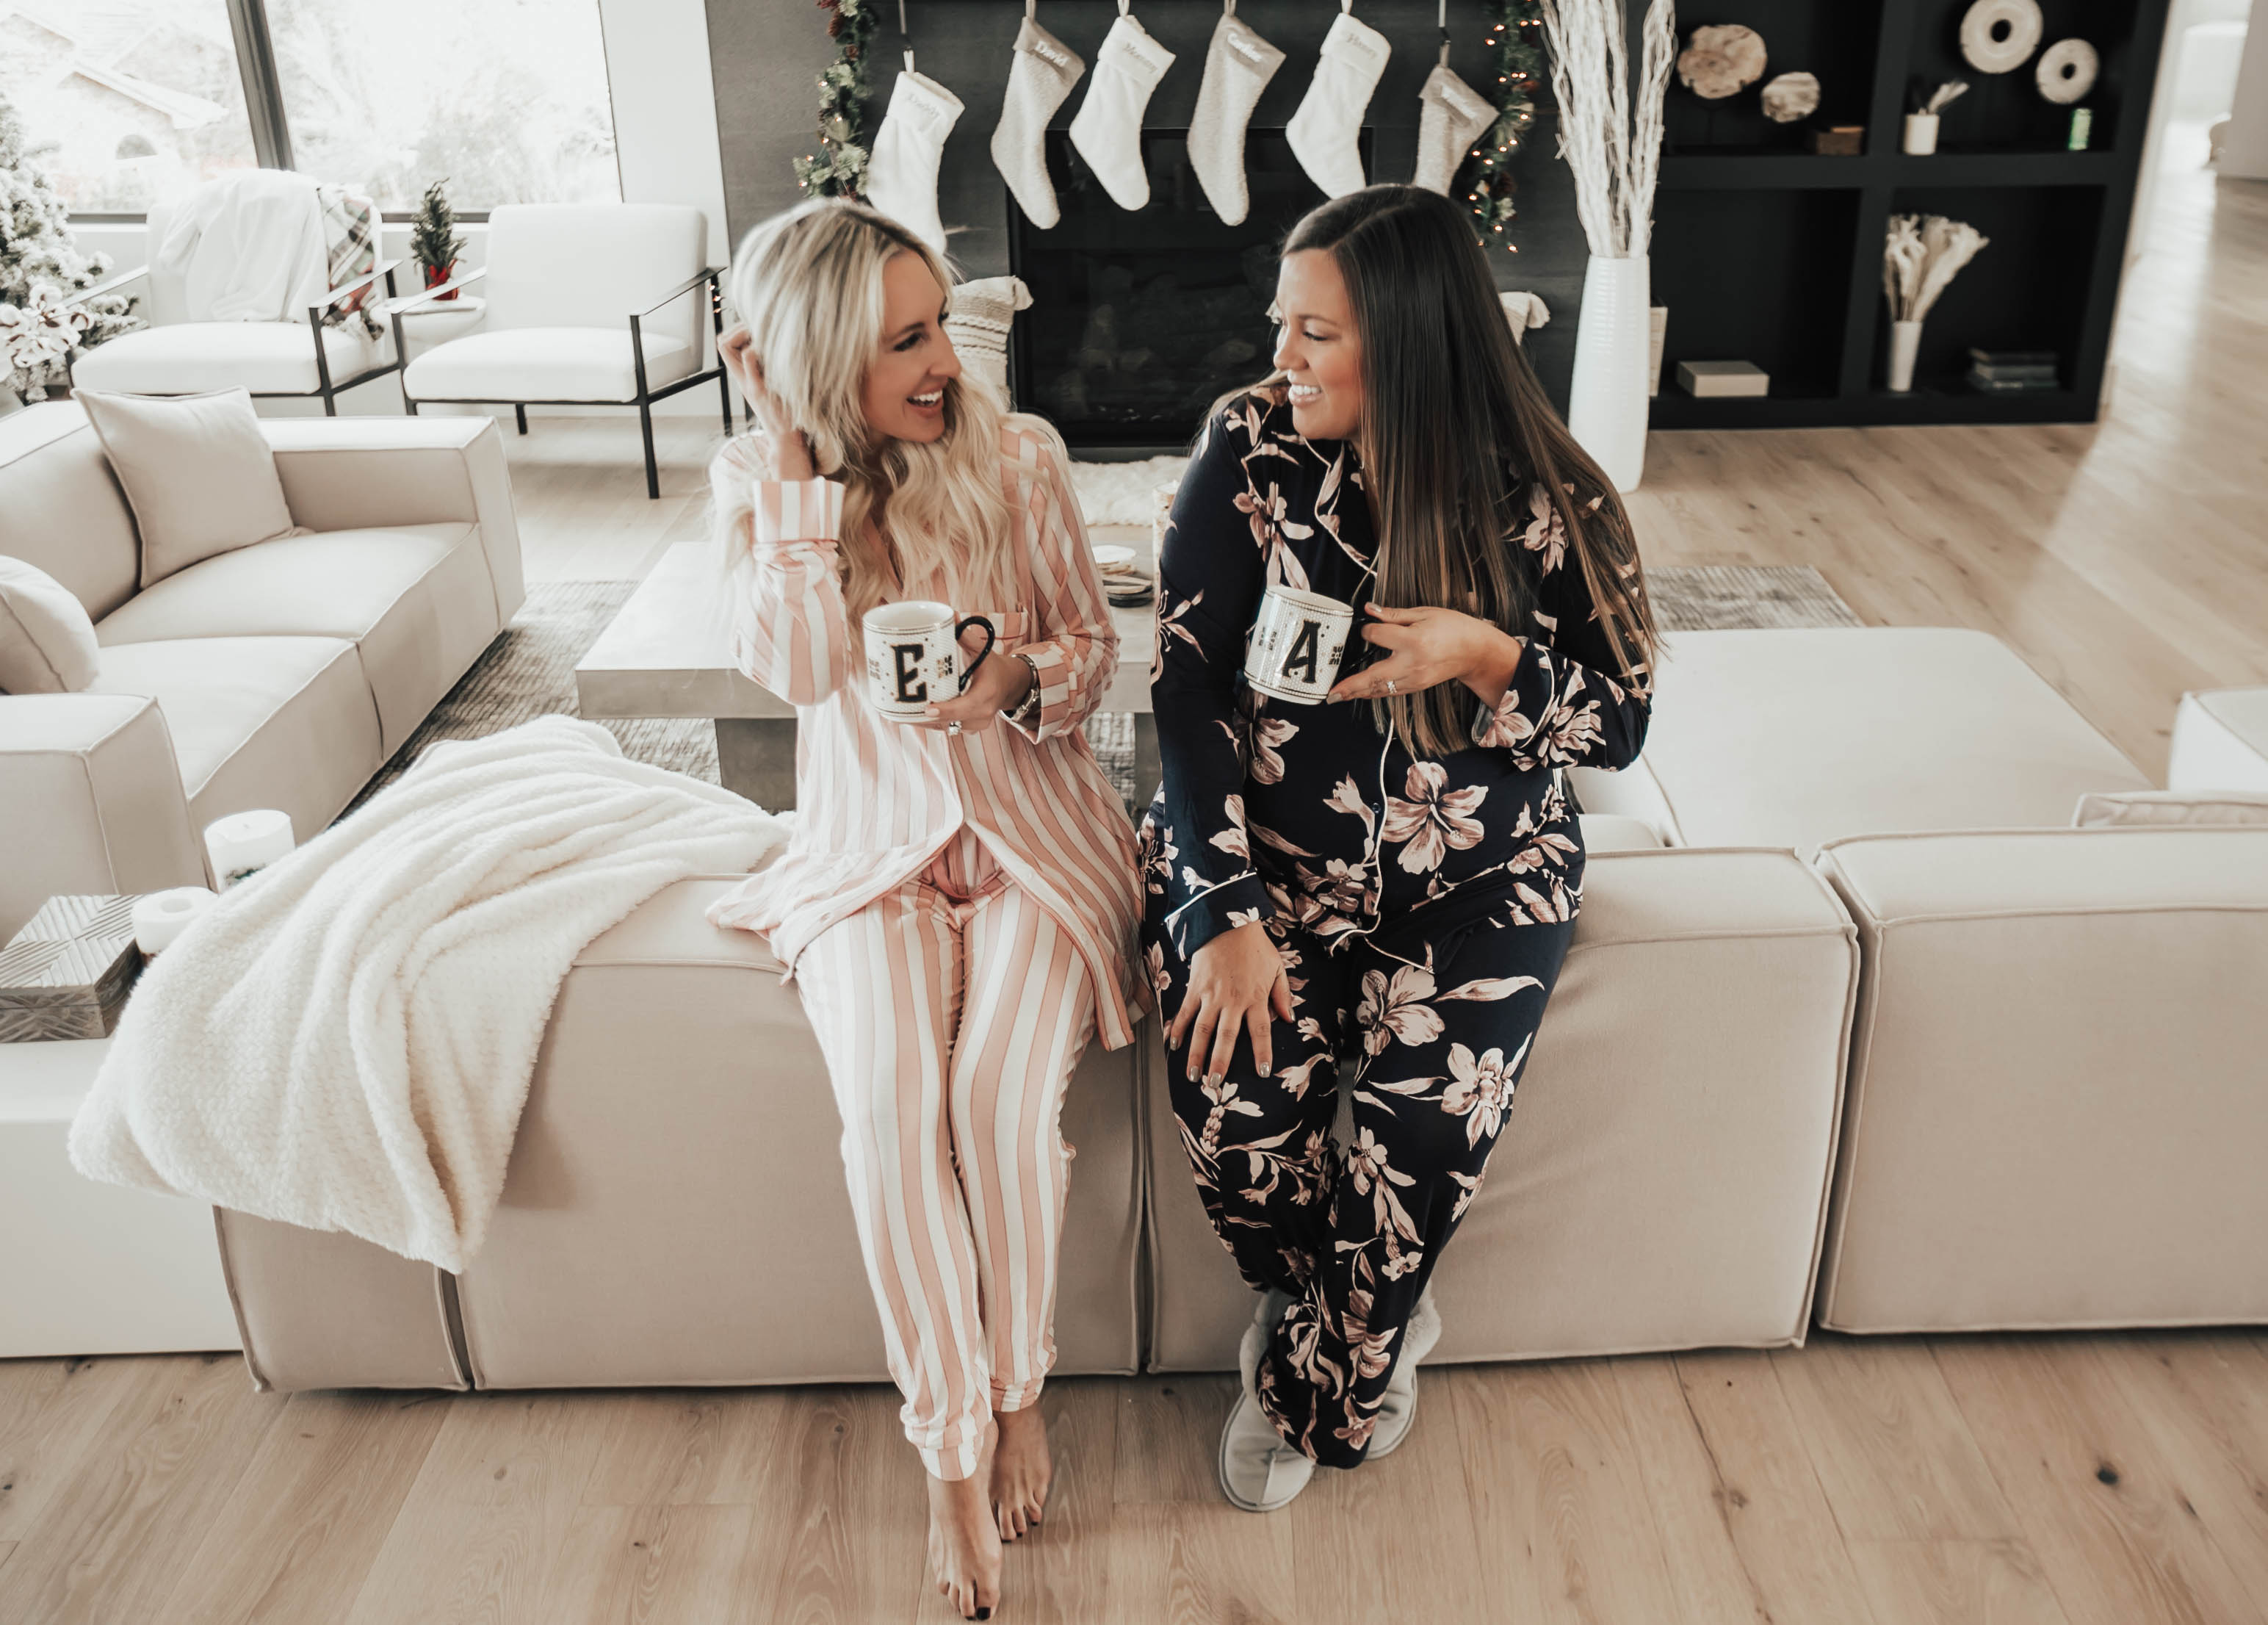 Bloggers Ashley Zeal and Emily Wieczorek from Two Peas in a Prada share their Gift Guide for your Bestie. They are sharing all the best gifts to buy you bff this holiday season!